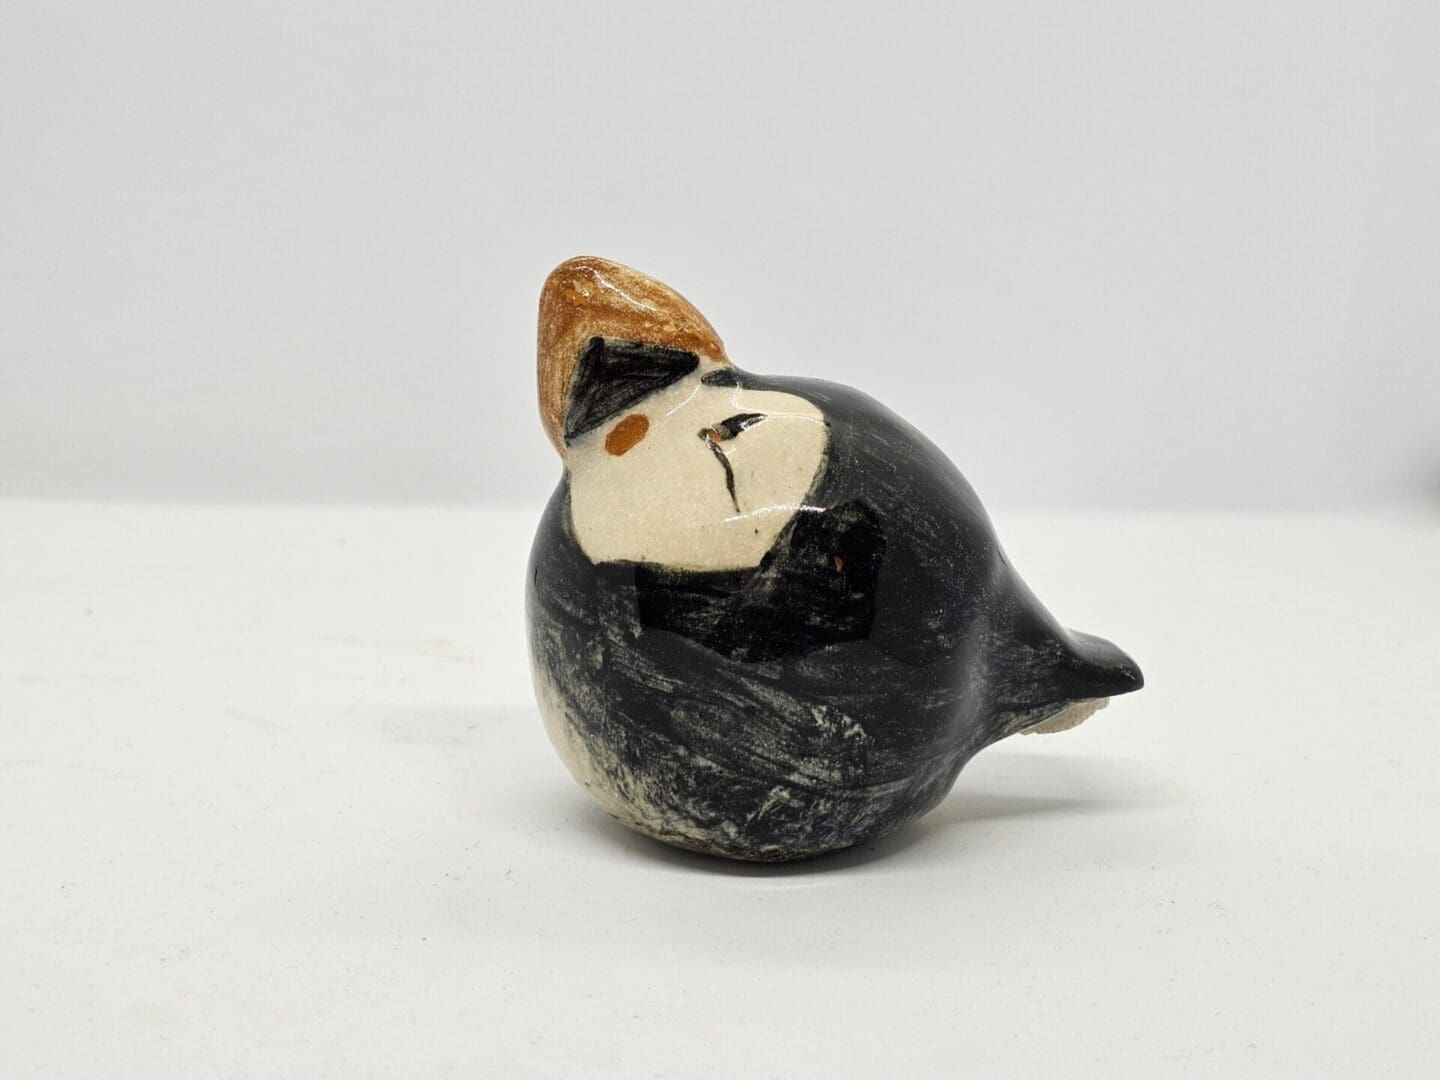 On a white background, a left facing view of a ceramic puffin